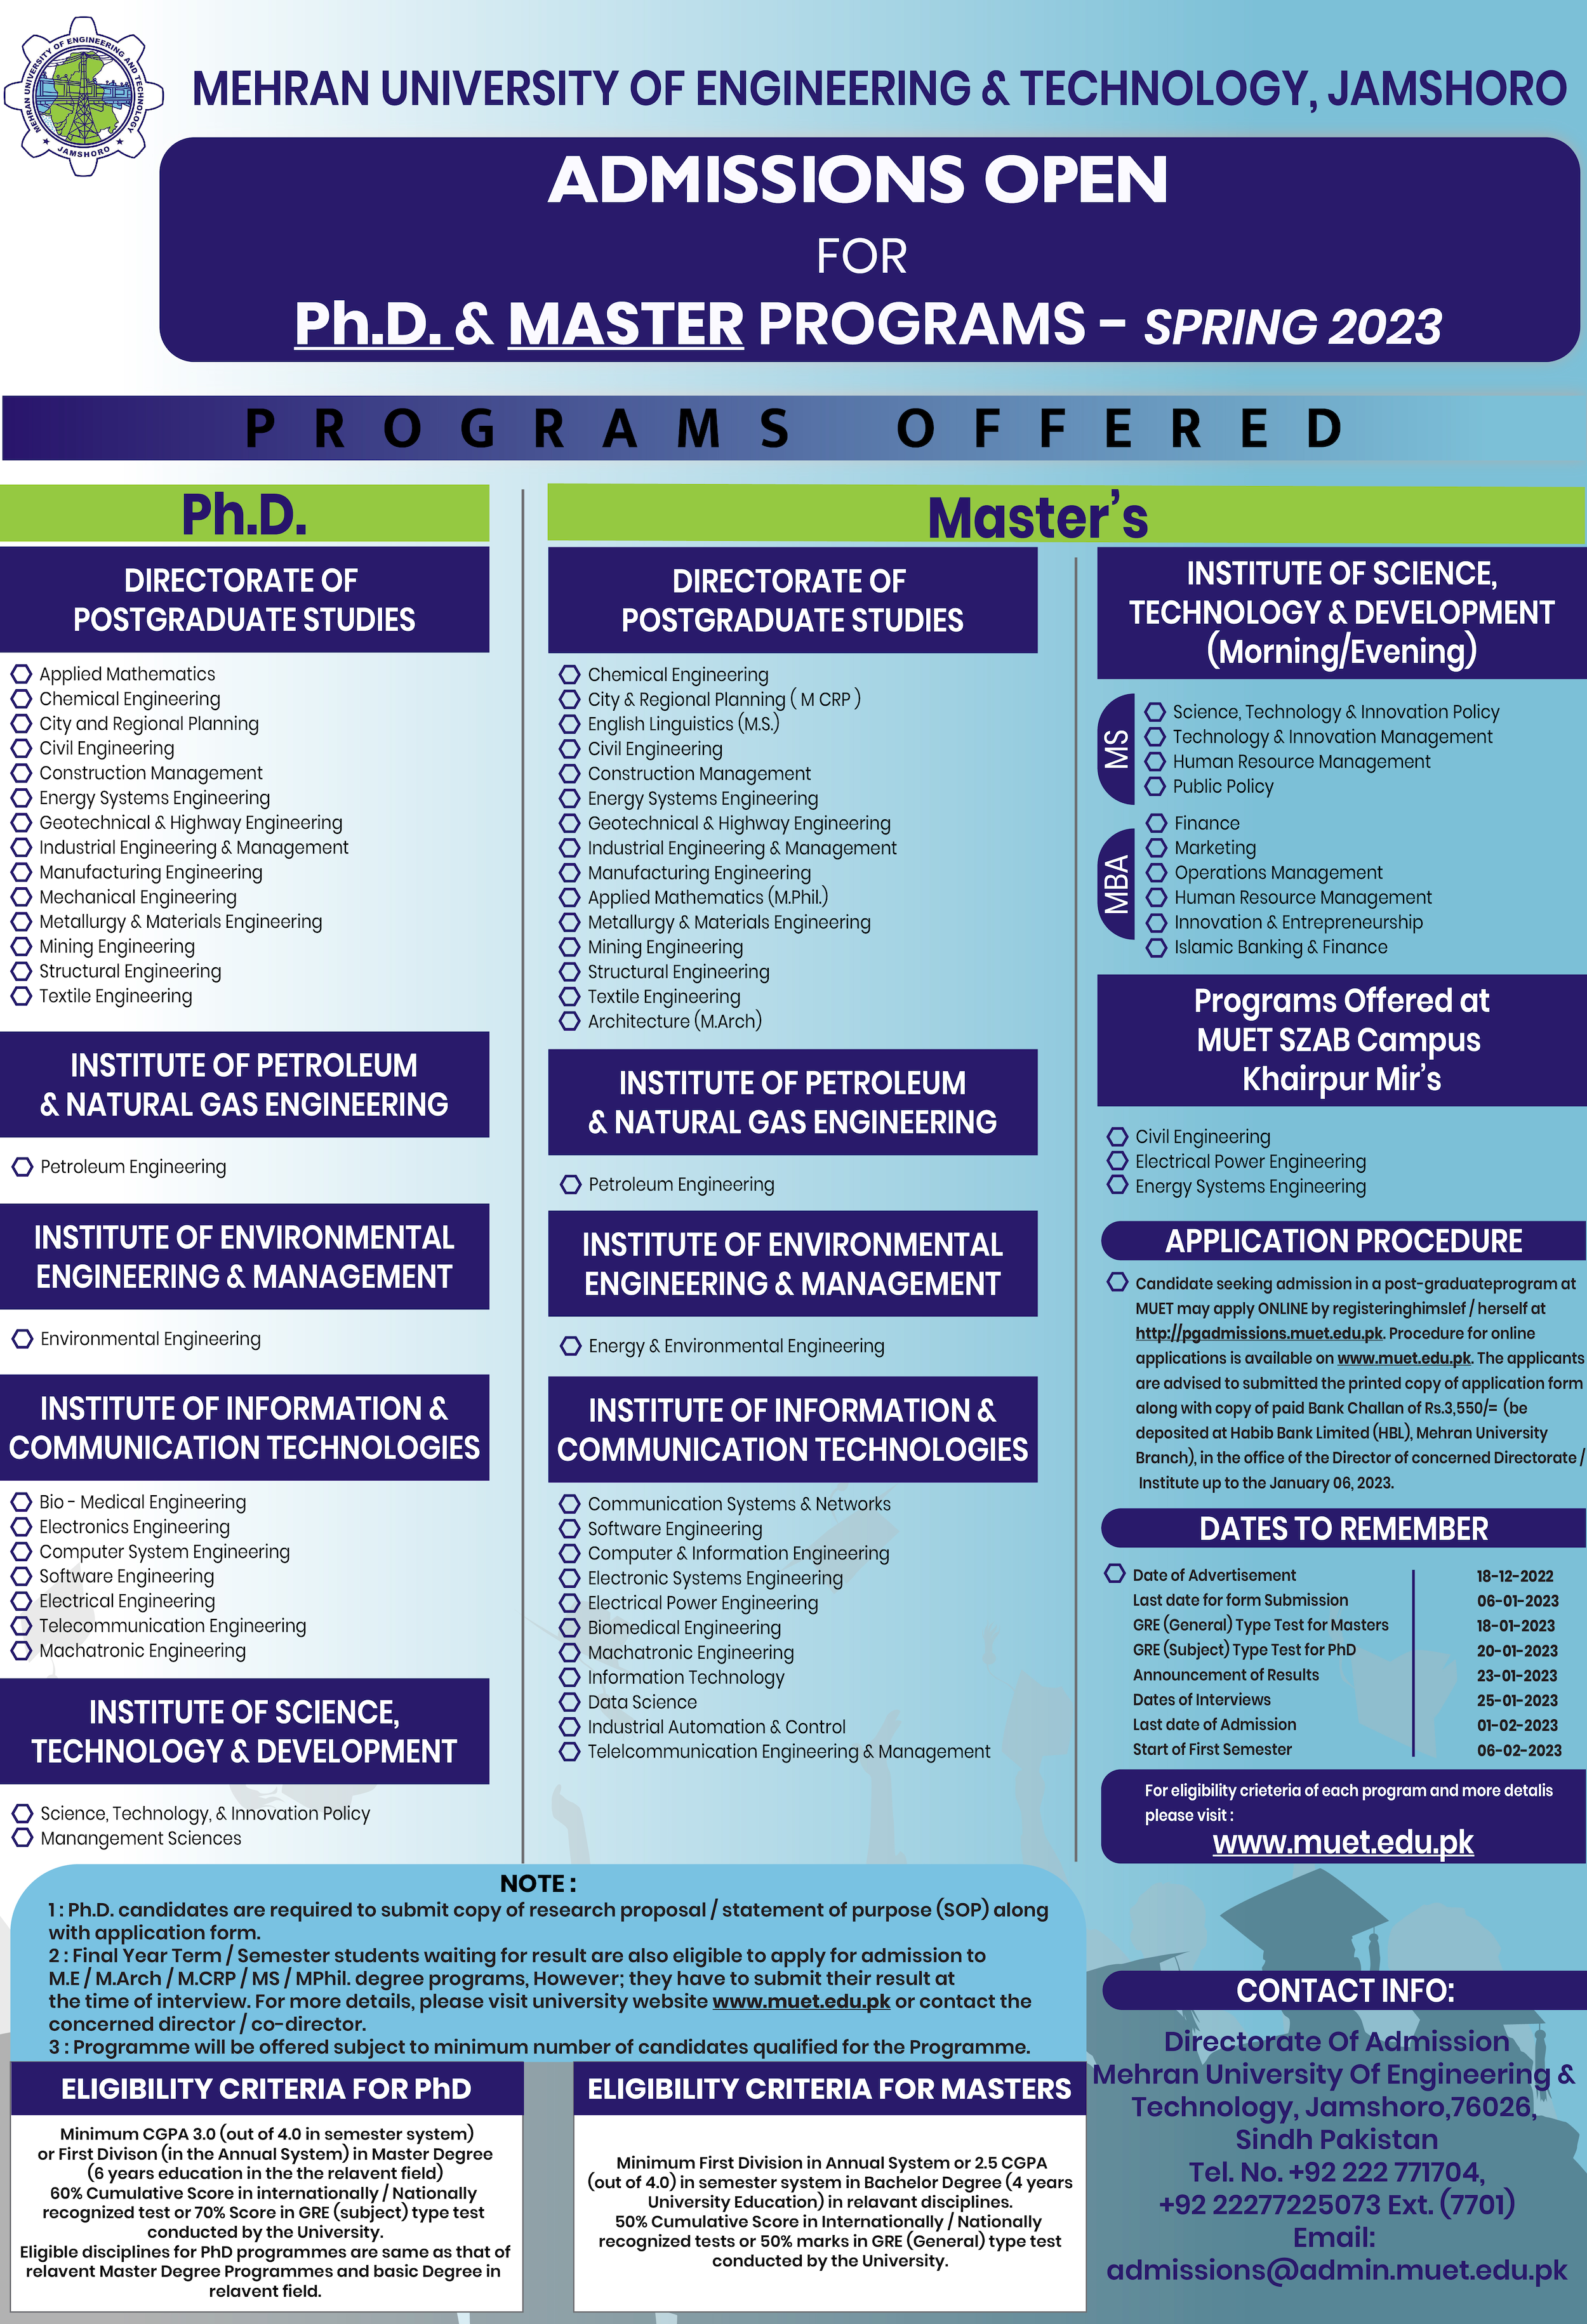 Admissions Open for PhD & Master Programs